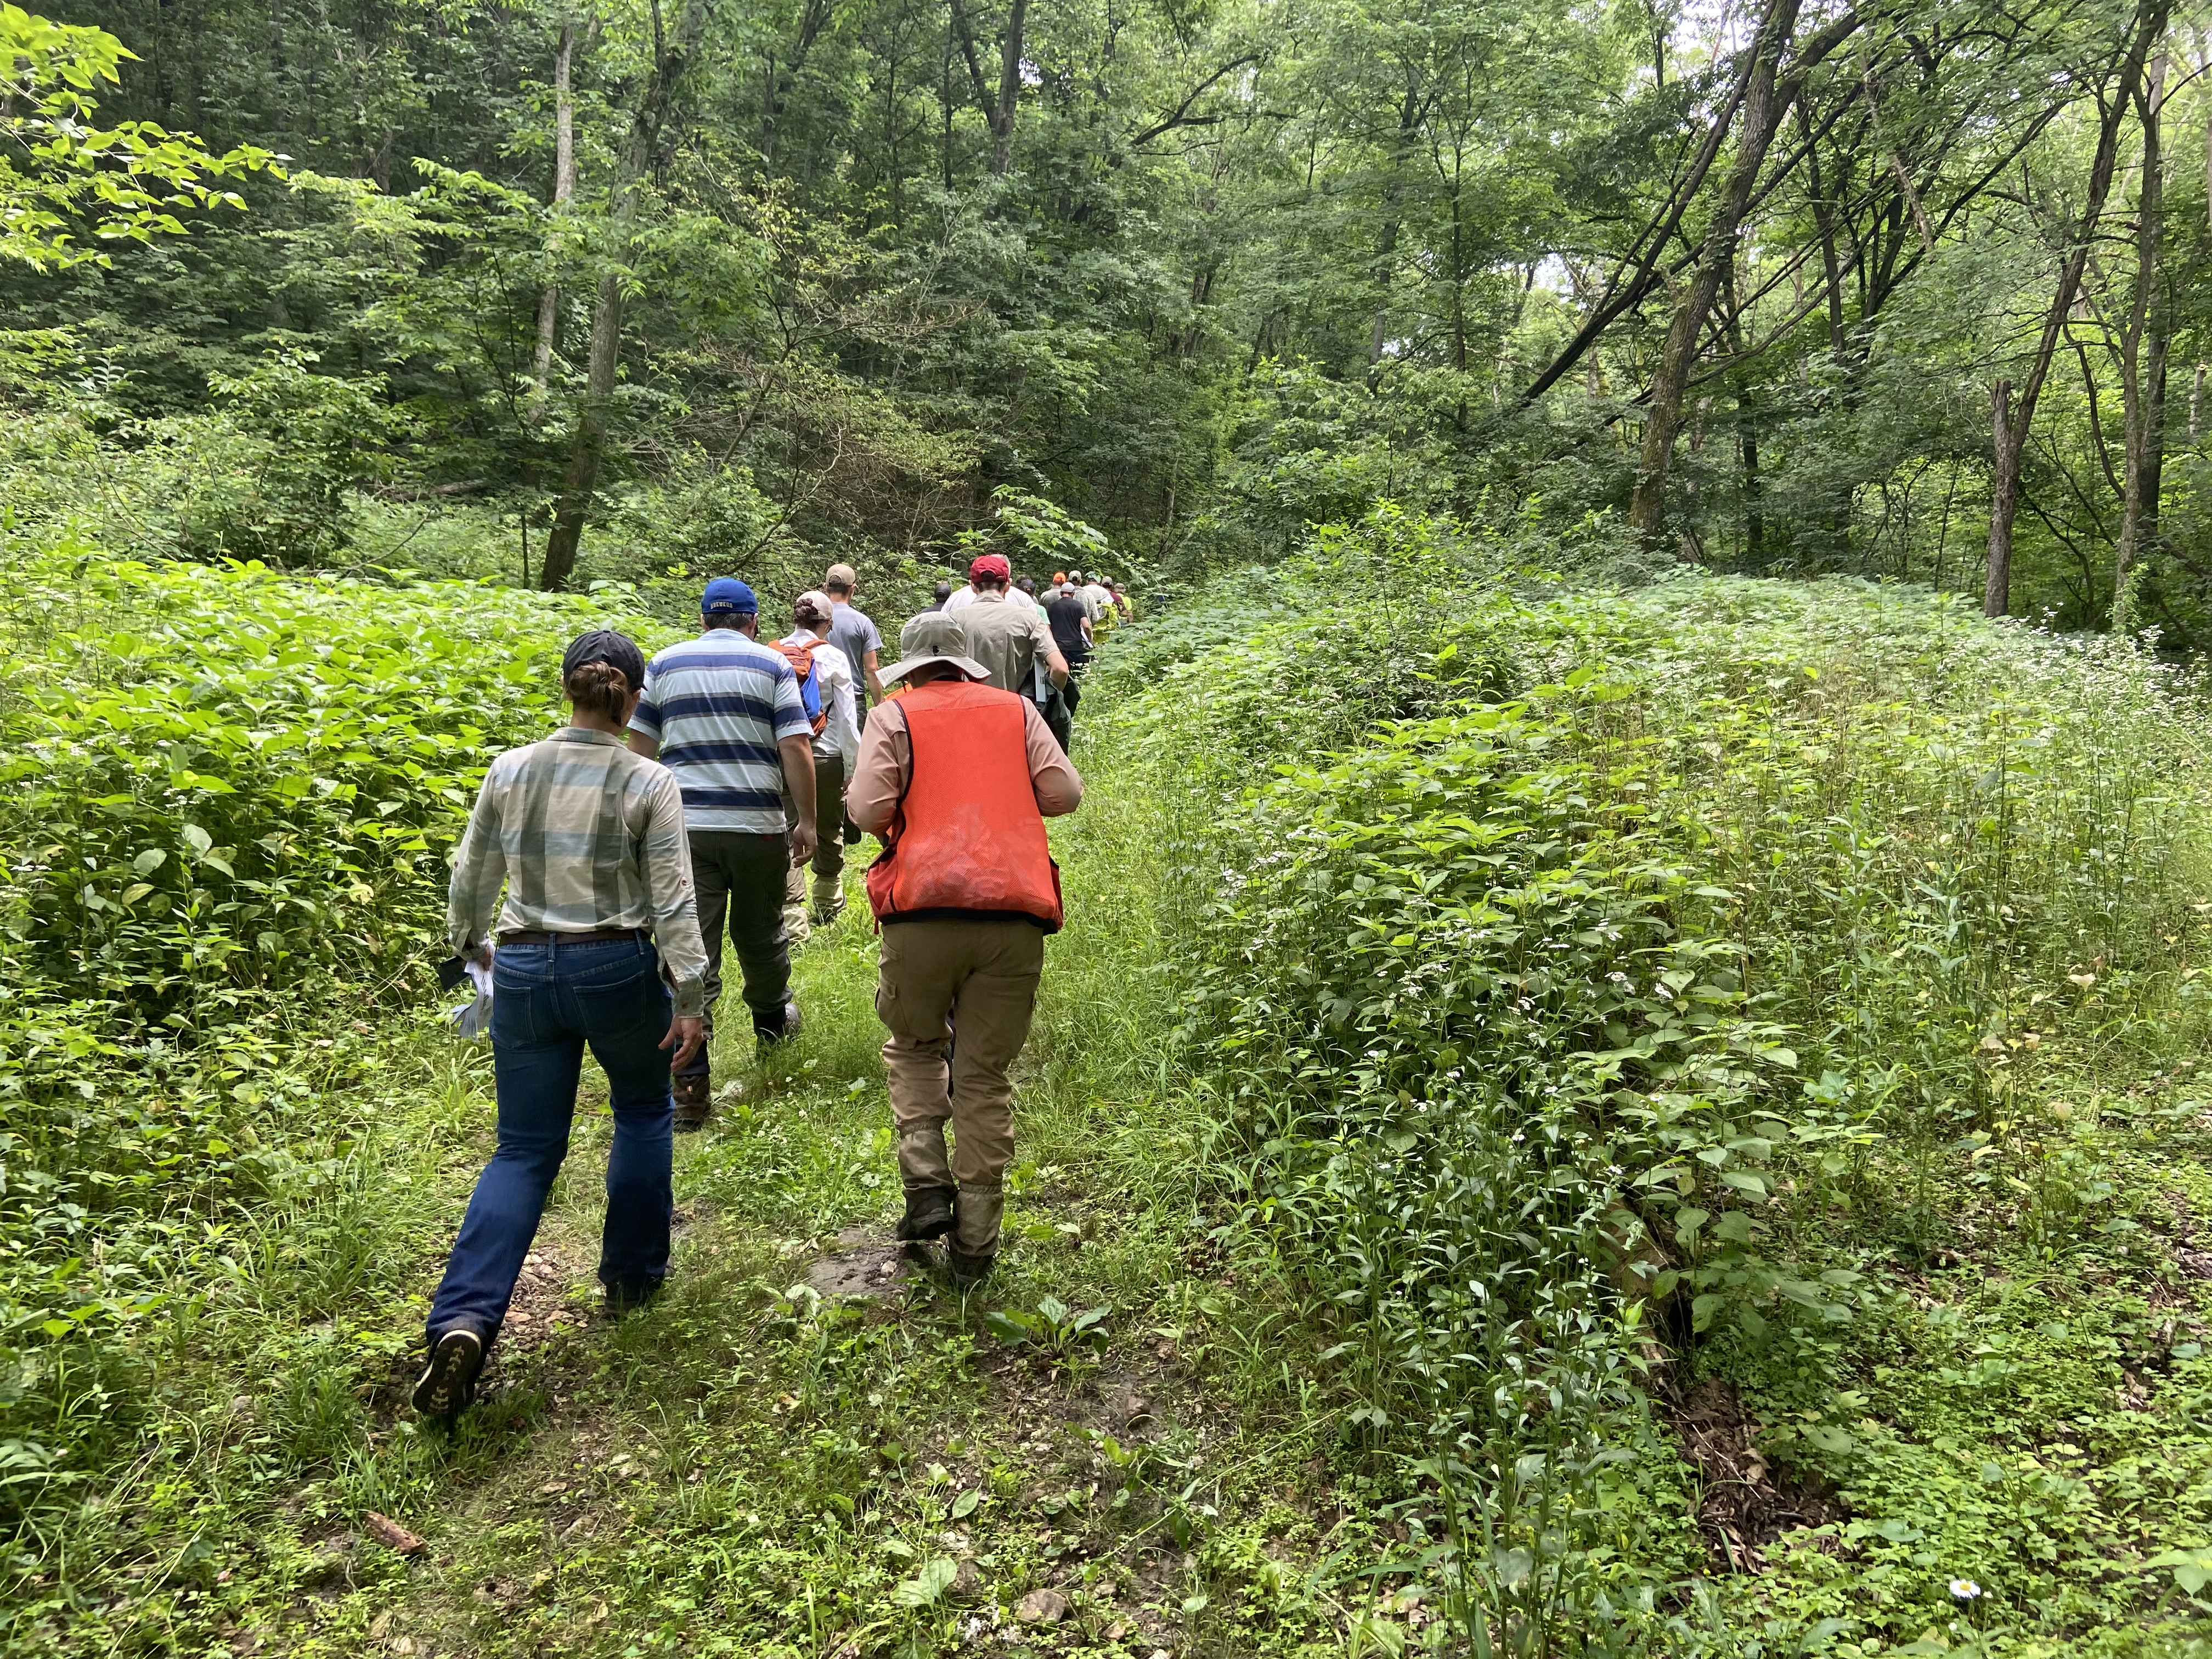 Tour of the Driftless Area, ASCC site